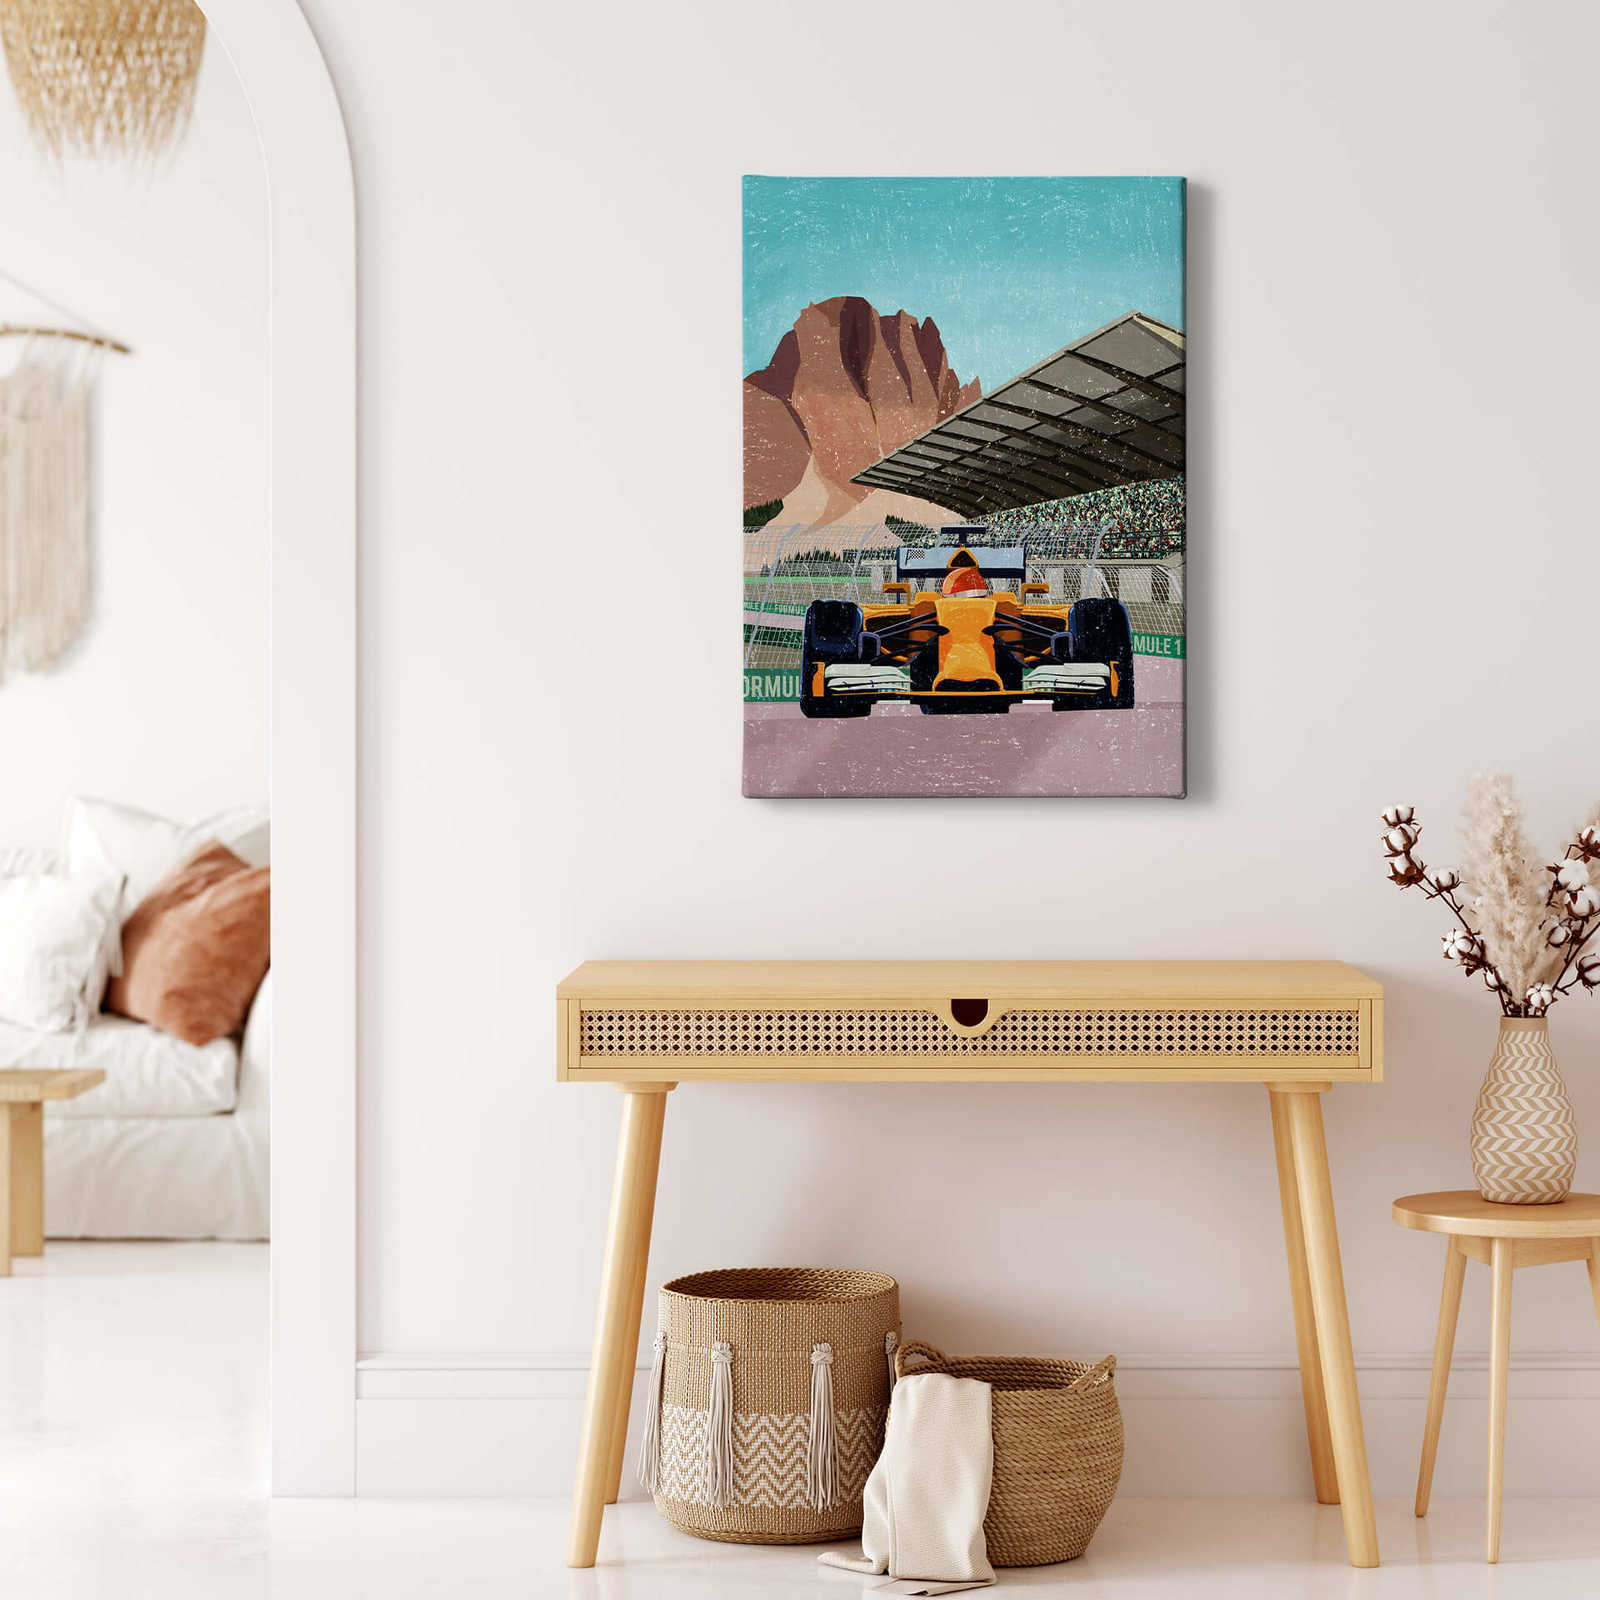             Canvas print racing cars by Goed Blauw – colourful
        